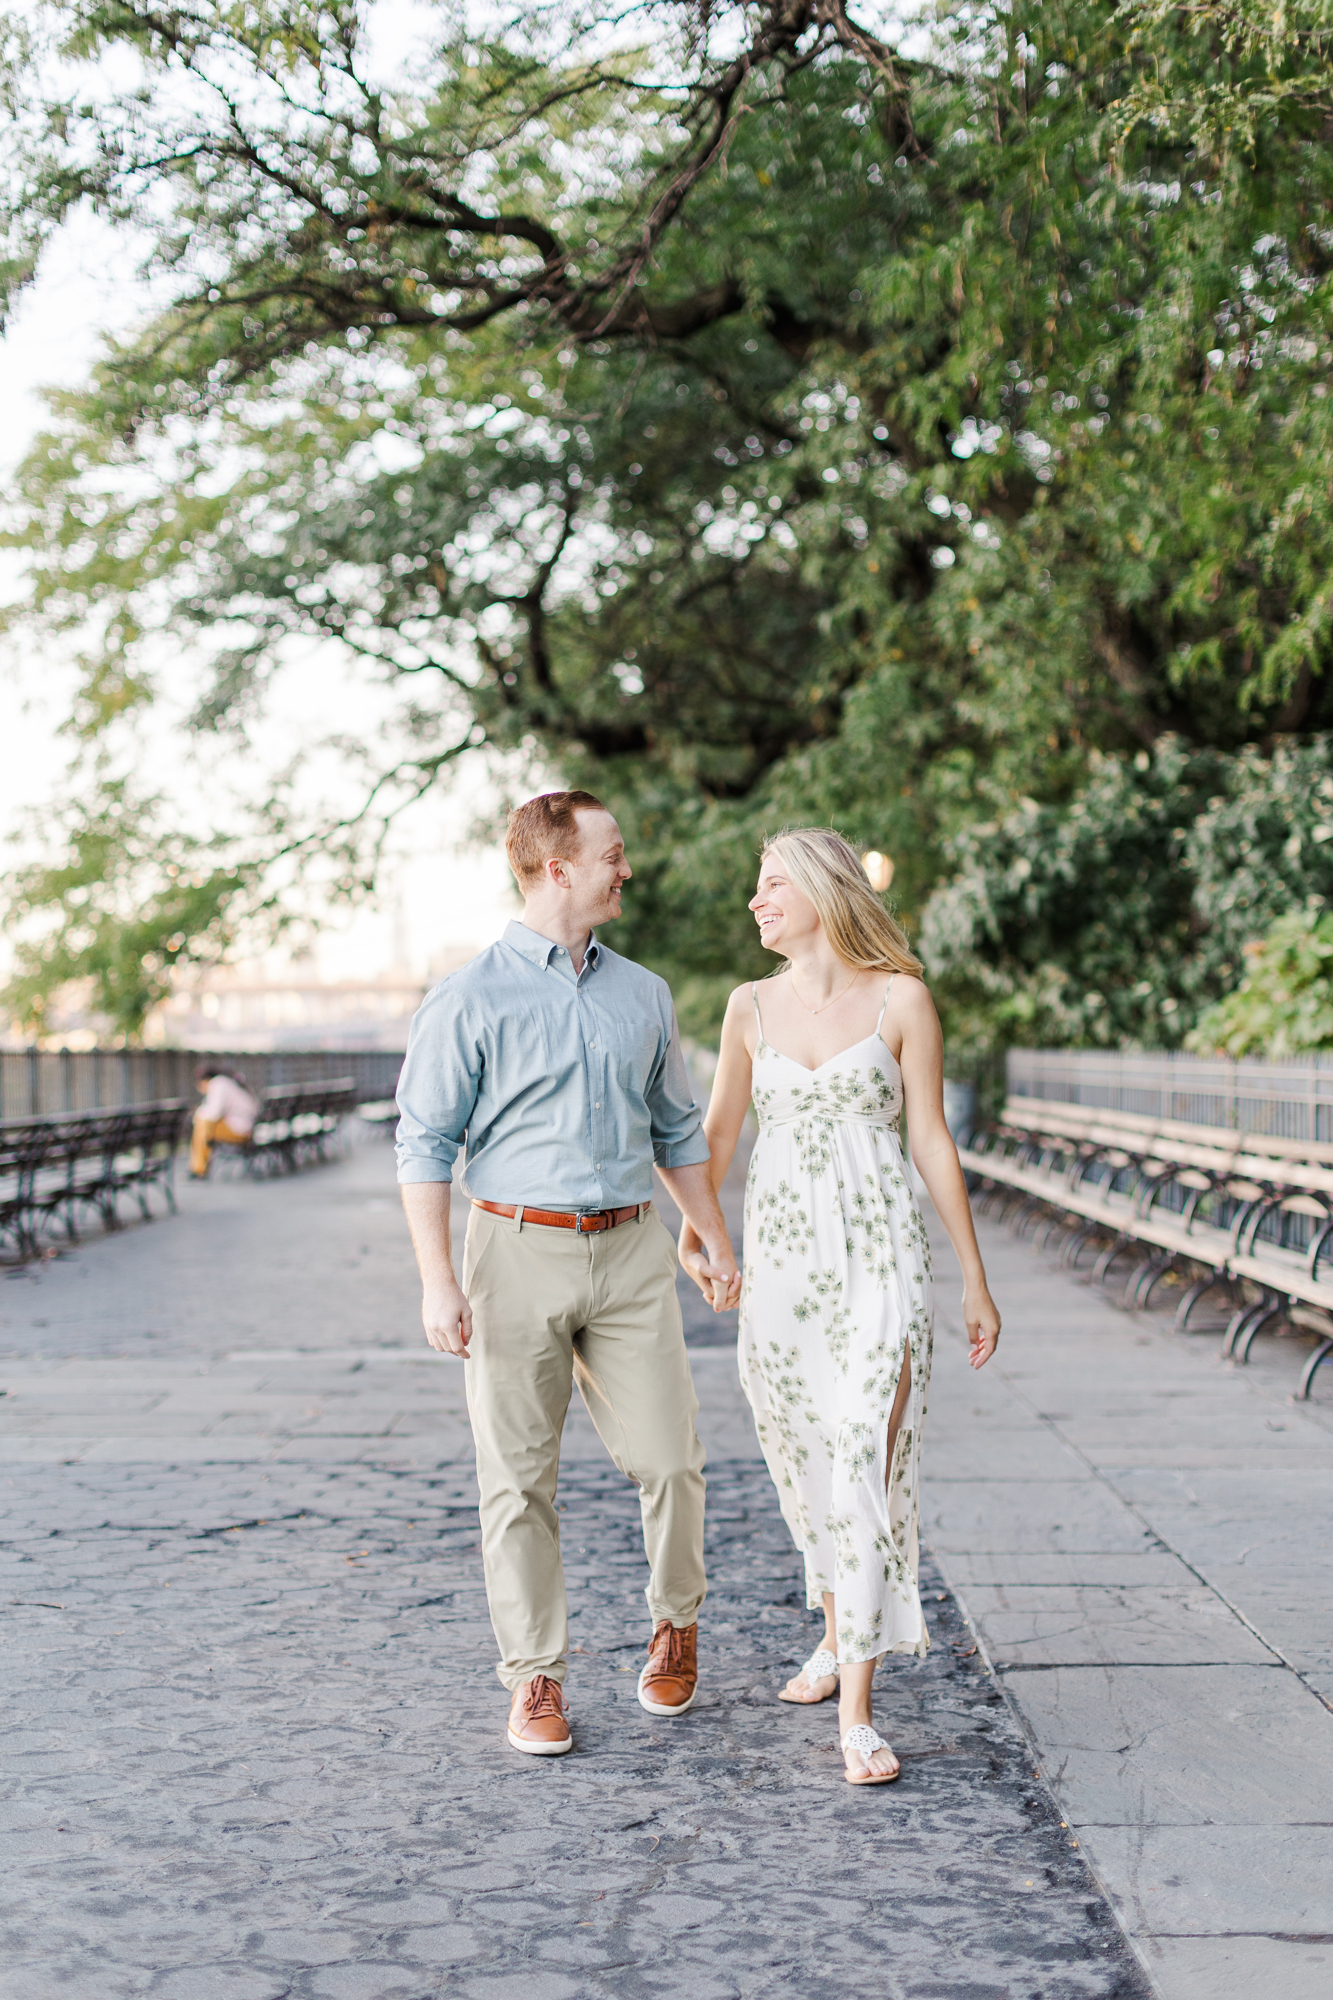 Awesome Engagement Photos In Brooklyn Heights